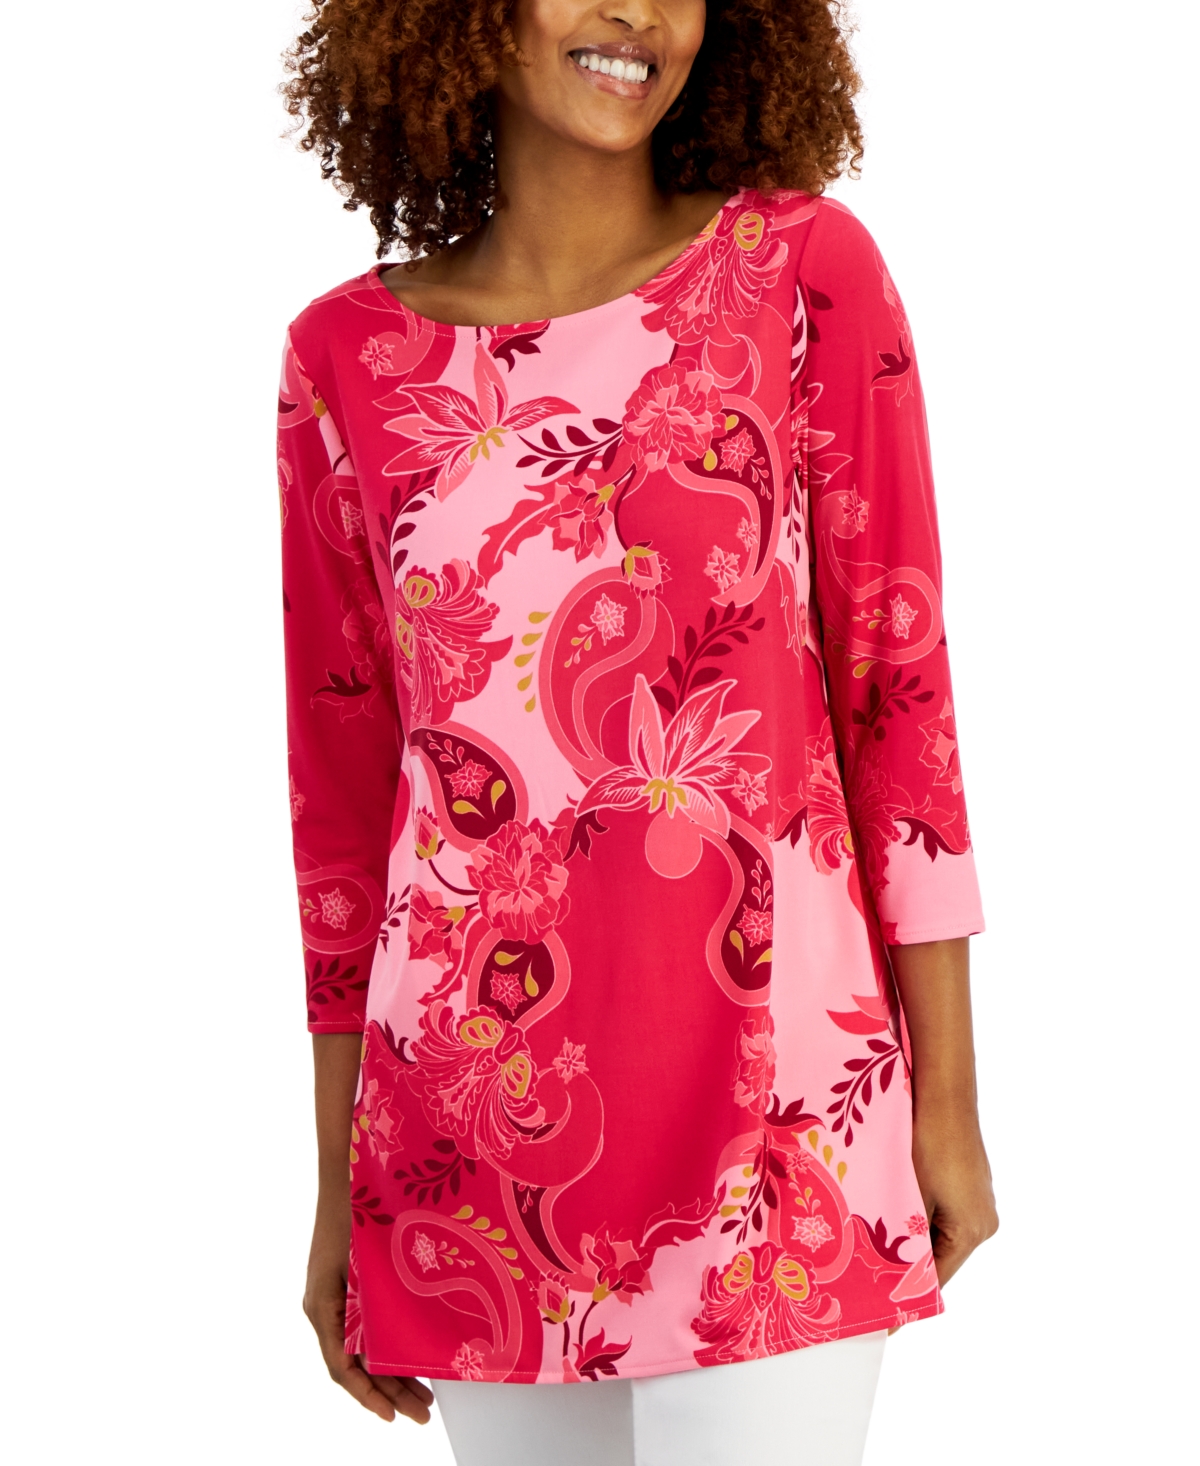 Women's Printed Boat-Neck Tunic Top, Created for Macy's - Claret Rose Combo